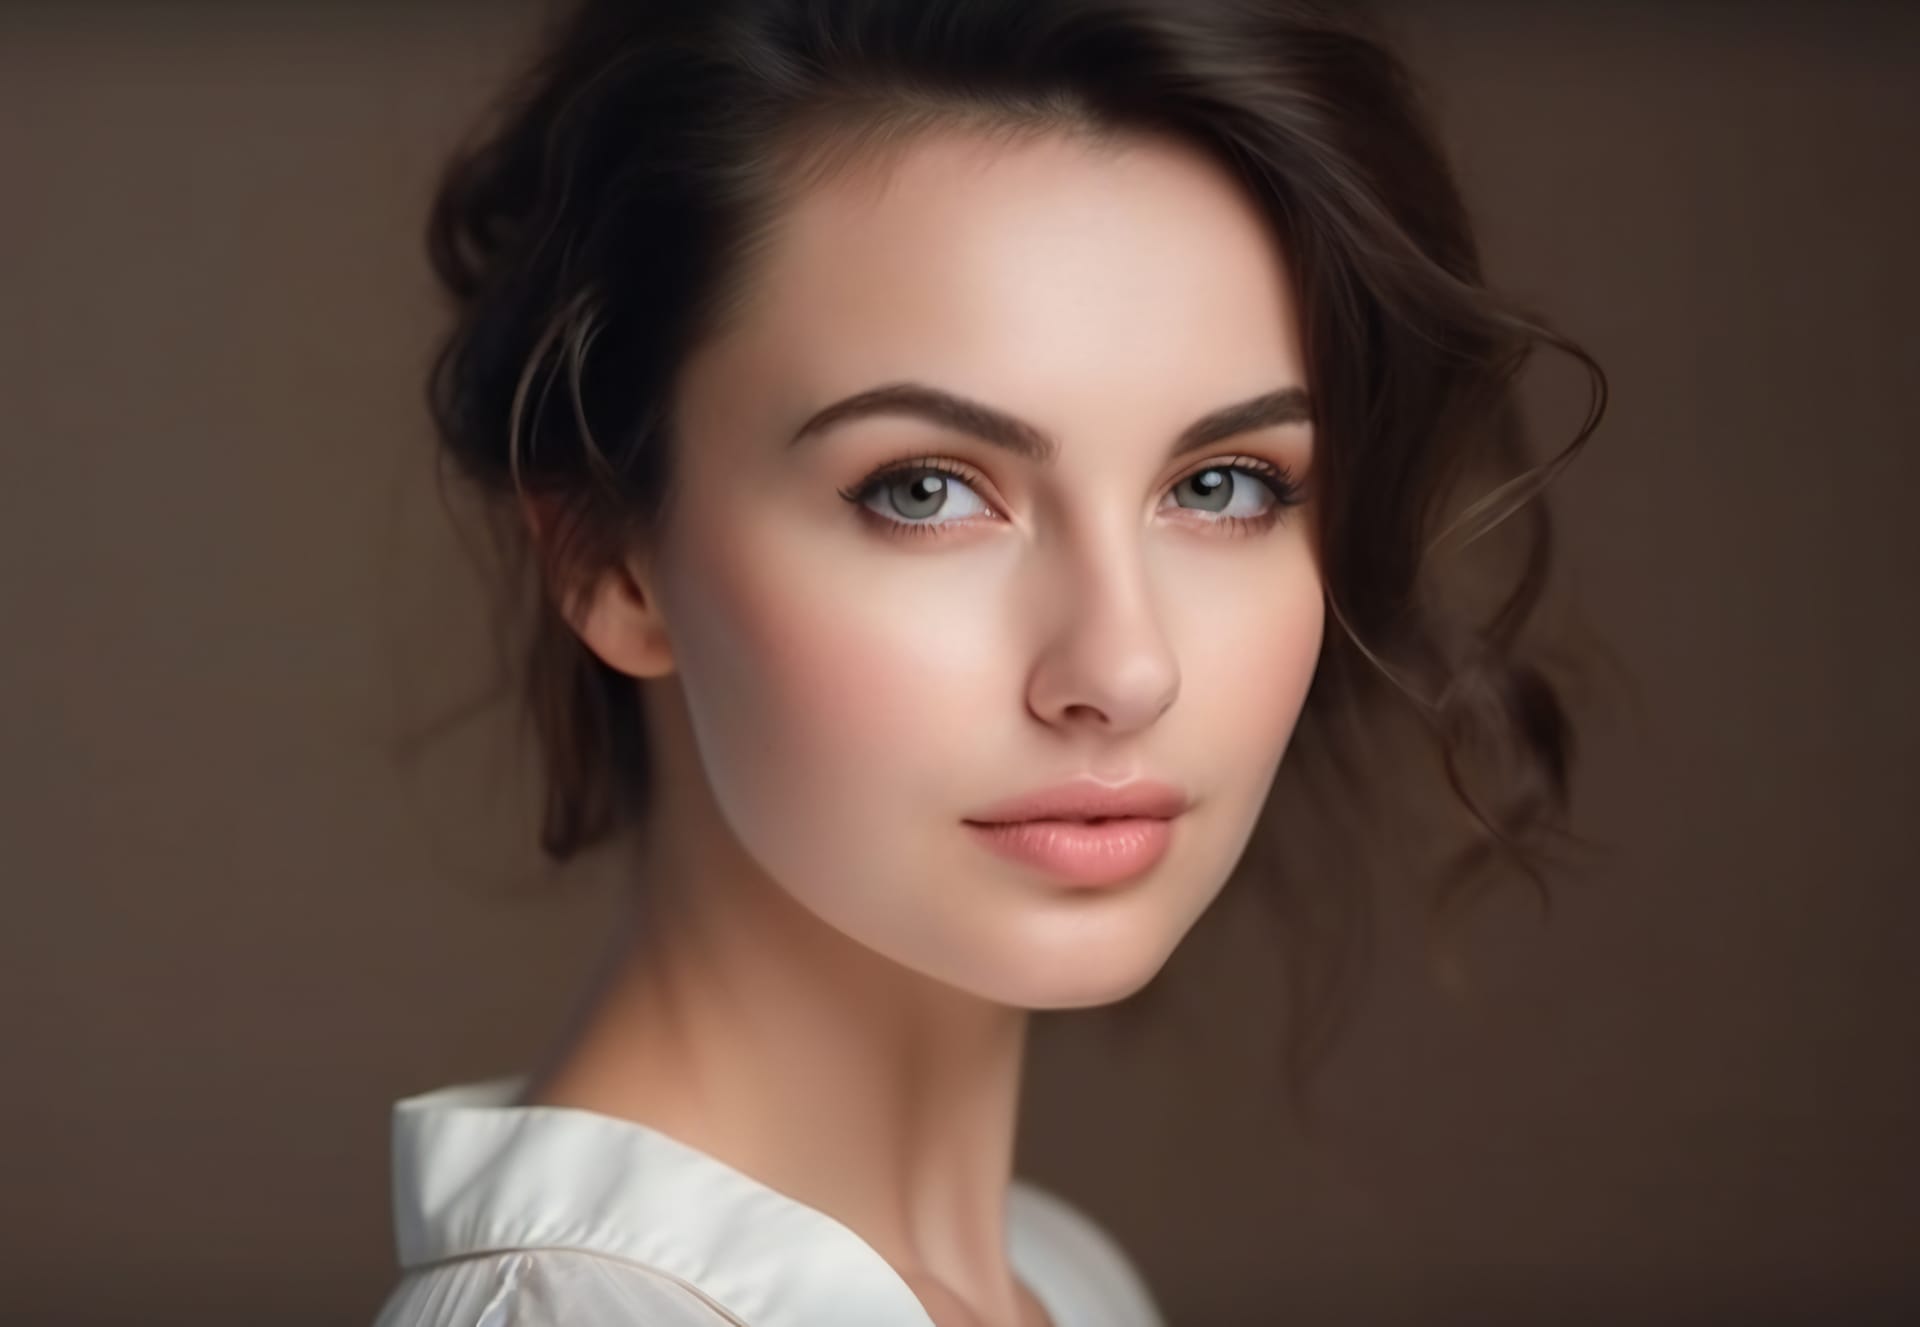 Digital painting woman with clean fresh skin facial people portraits